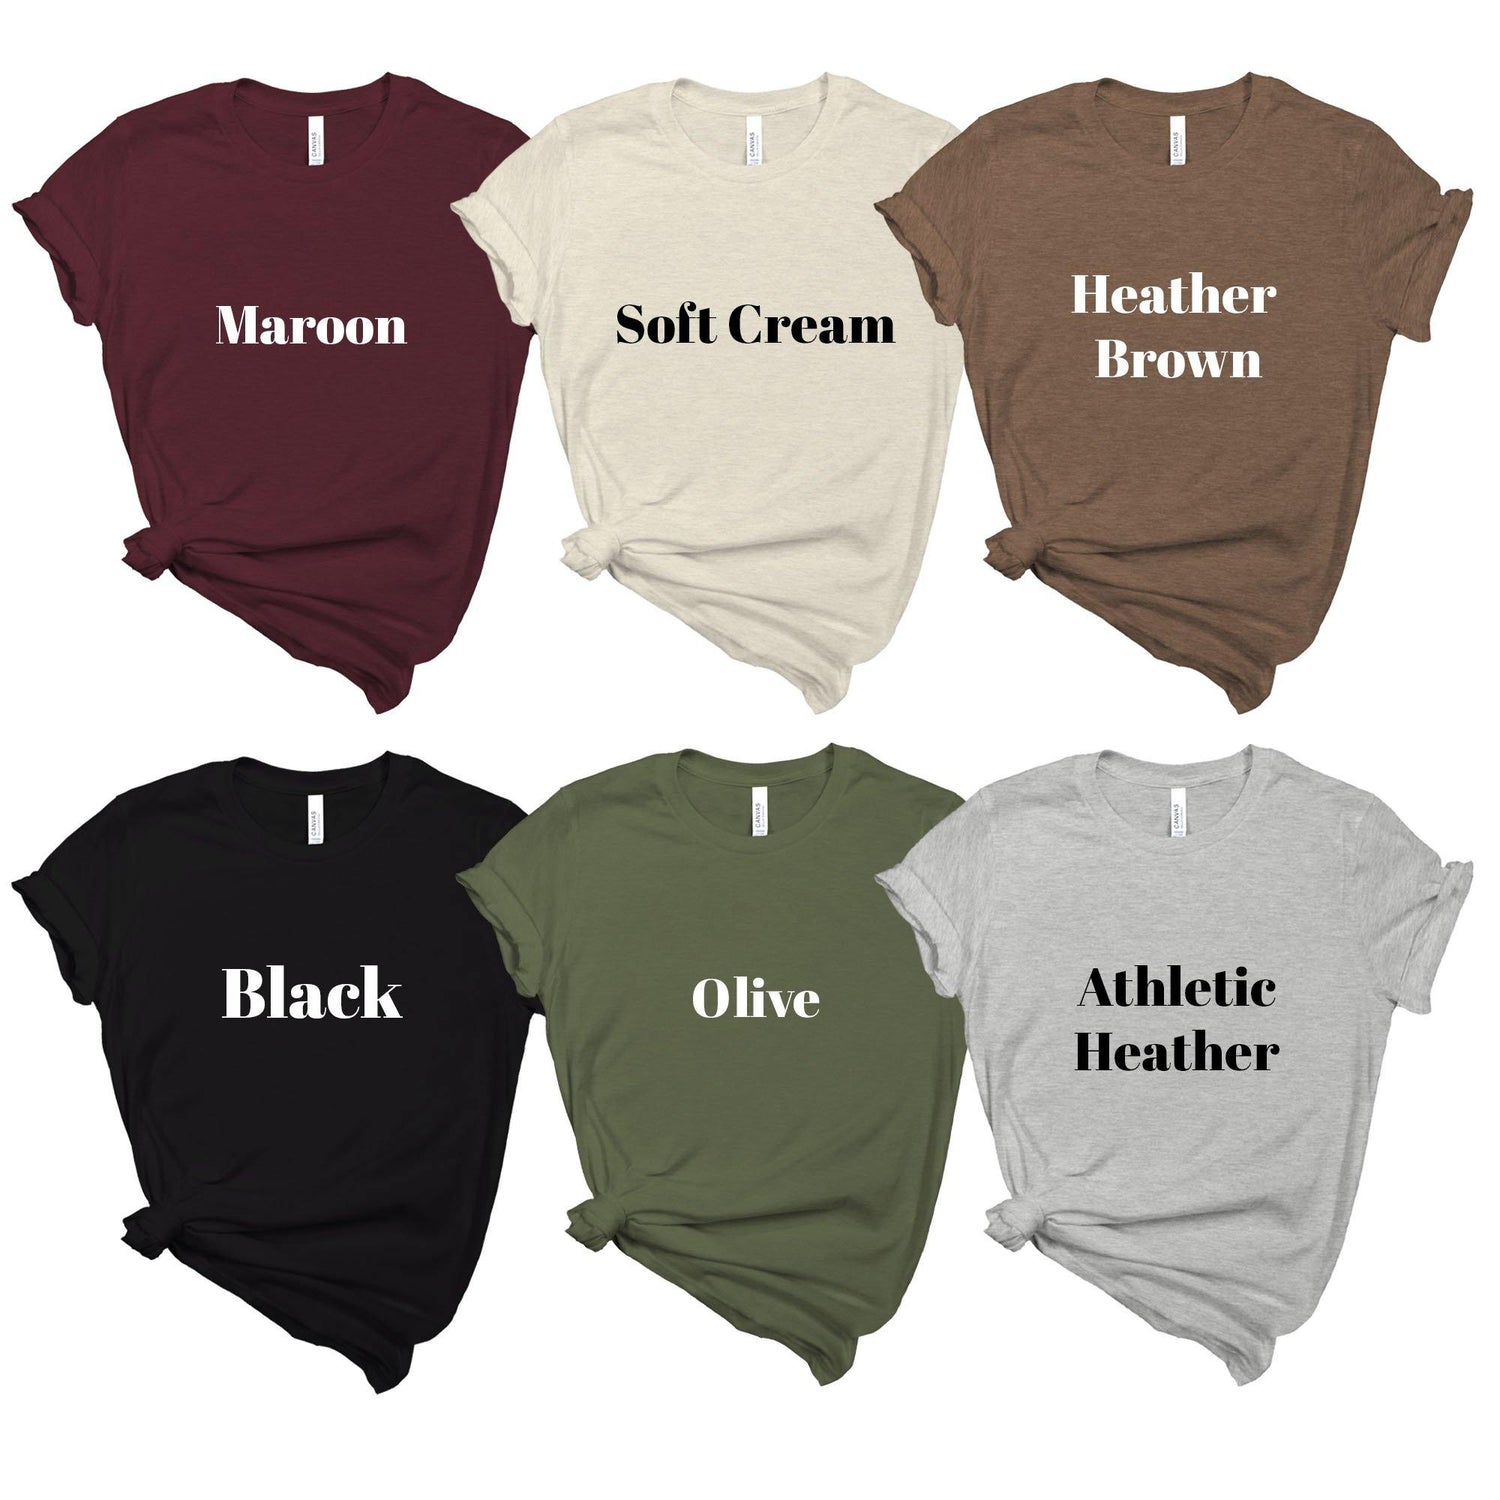 Christmas Shirts - Merry Christmas - Holiday Shirts - Gifts - Healthy Wealthy Skinny